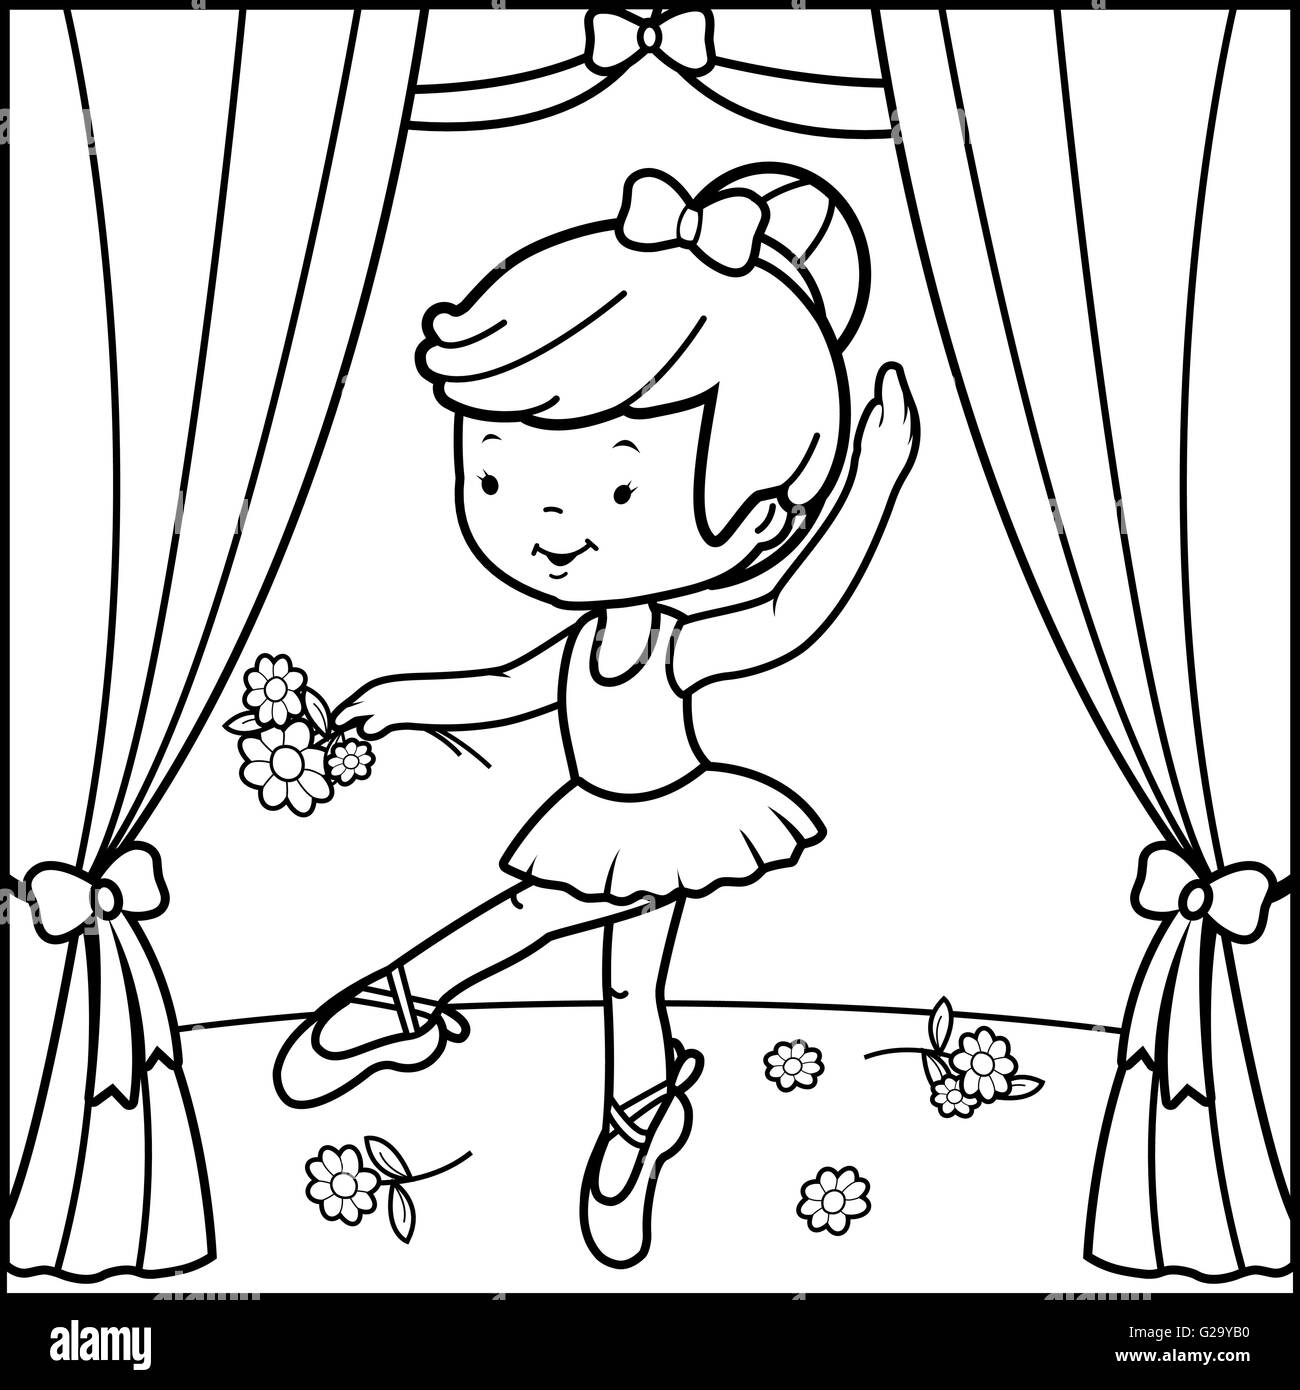 Coloring book page ballerina girl dancing on stage. Stock Vector